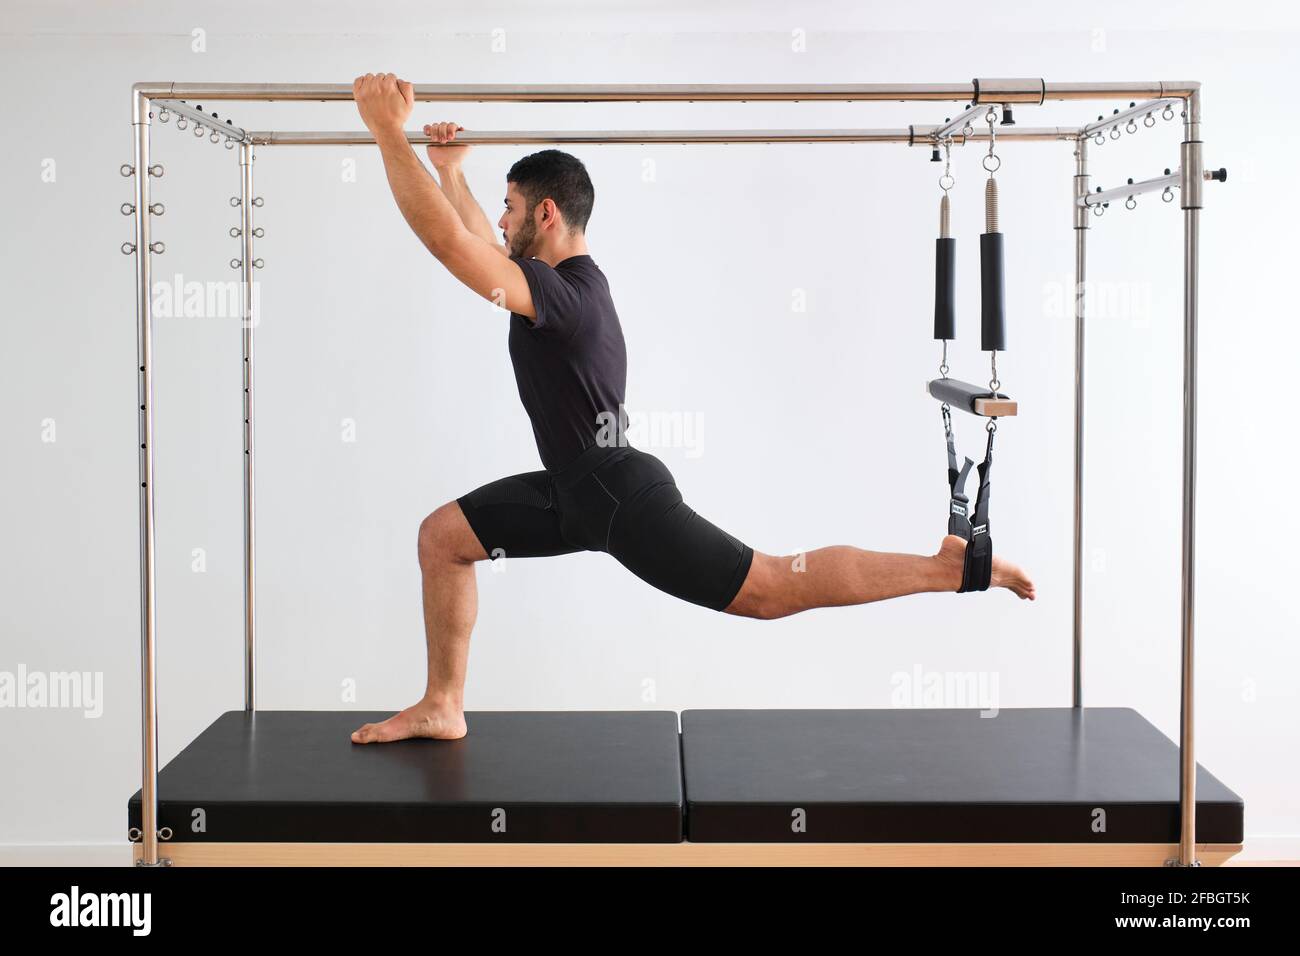 Mid adult male athlete practicing pilates on trapeze table in exercise room Stock Photo